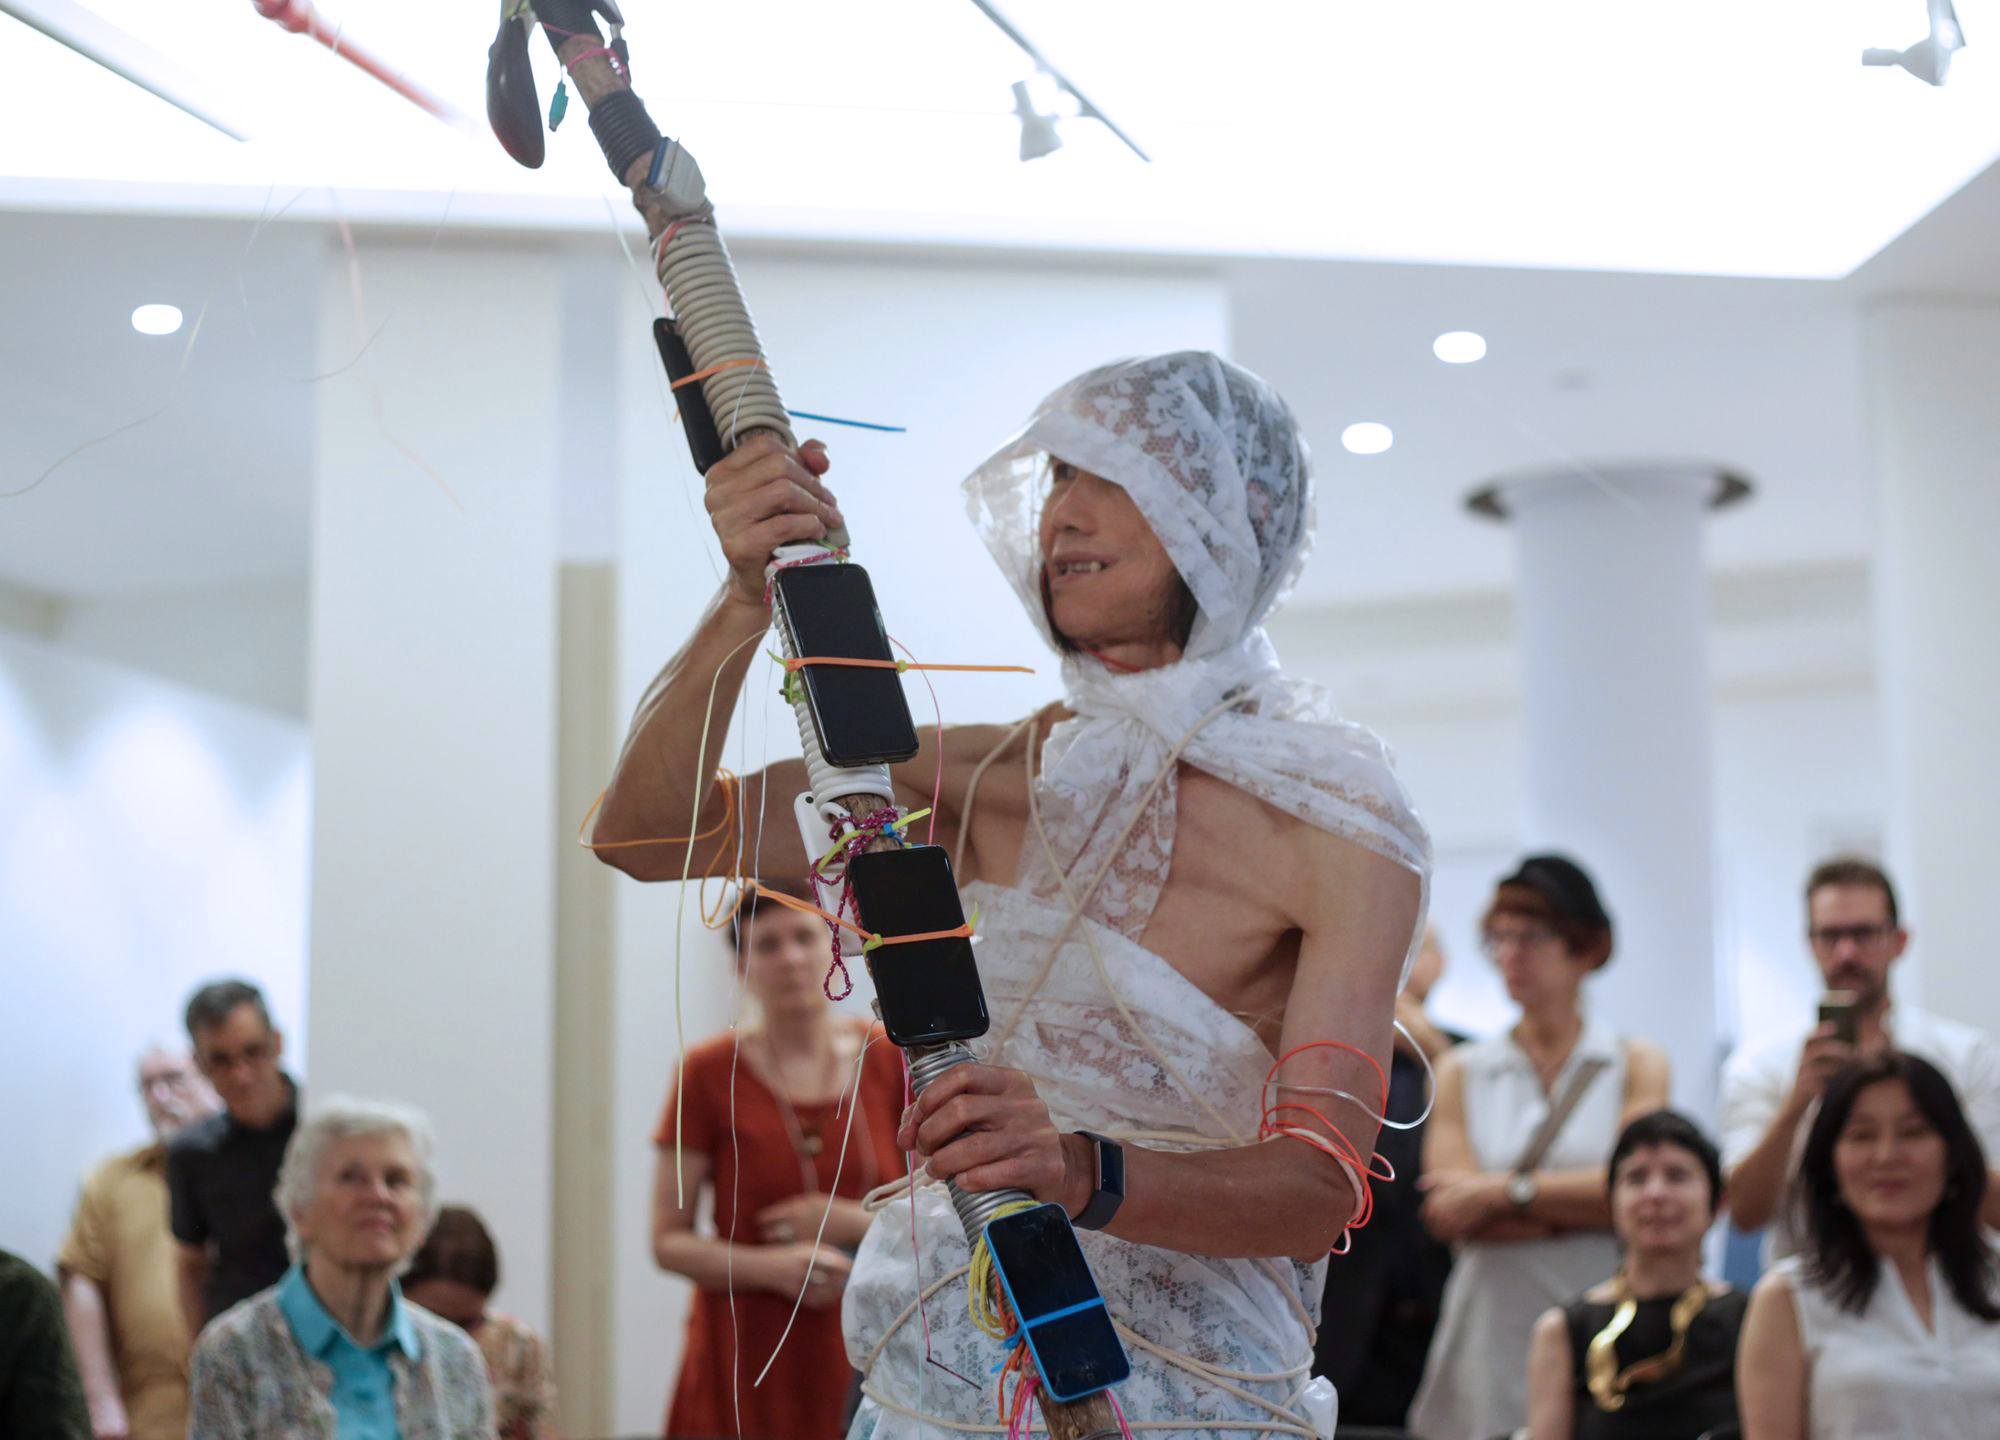 A person performing with fabric wrapped around their head and body holding a long stick with iPhones held on while people watch